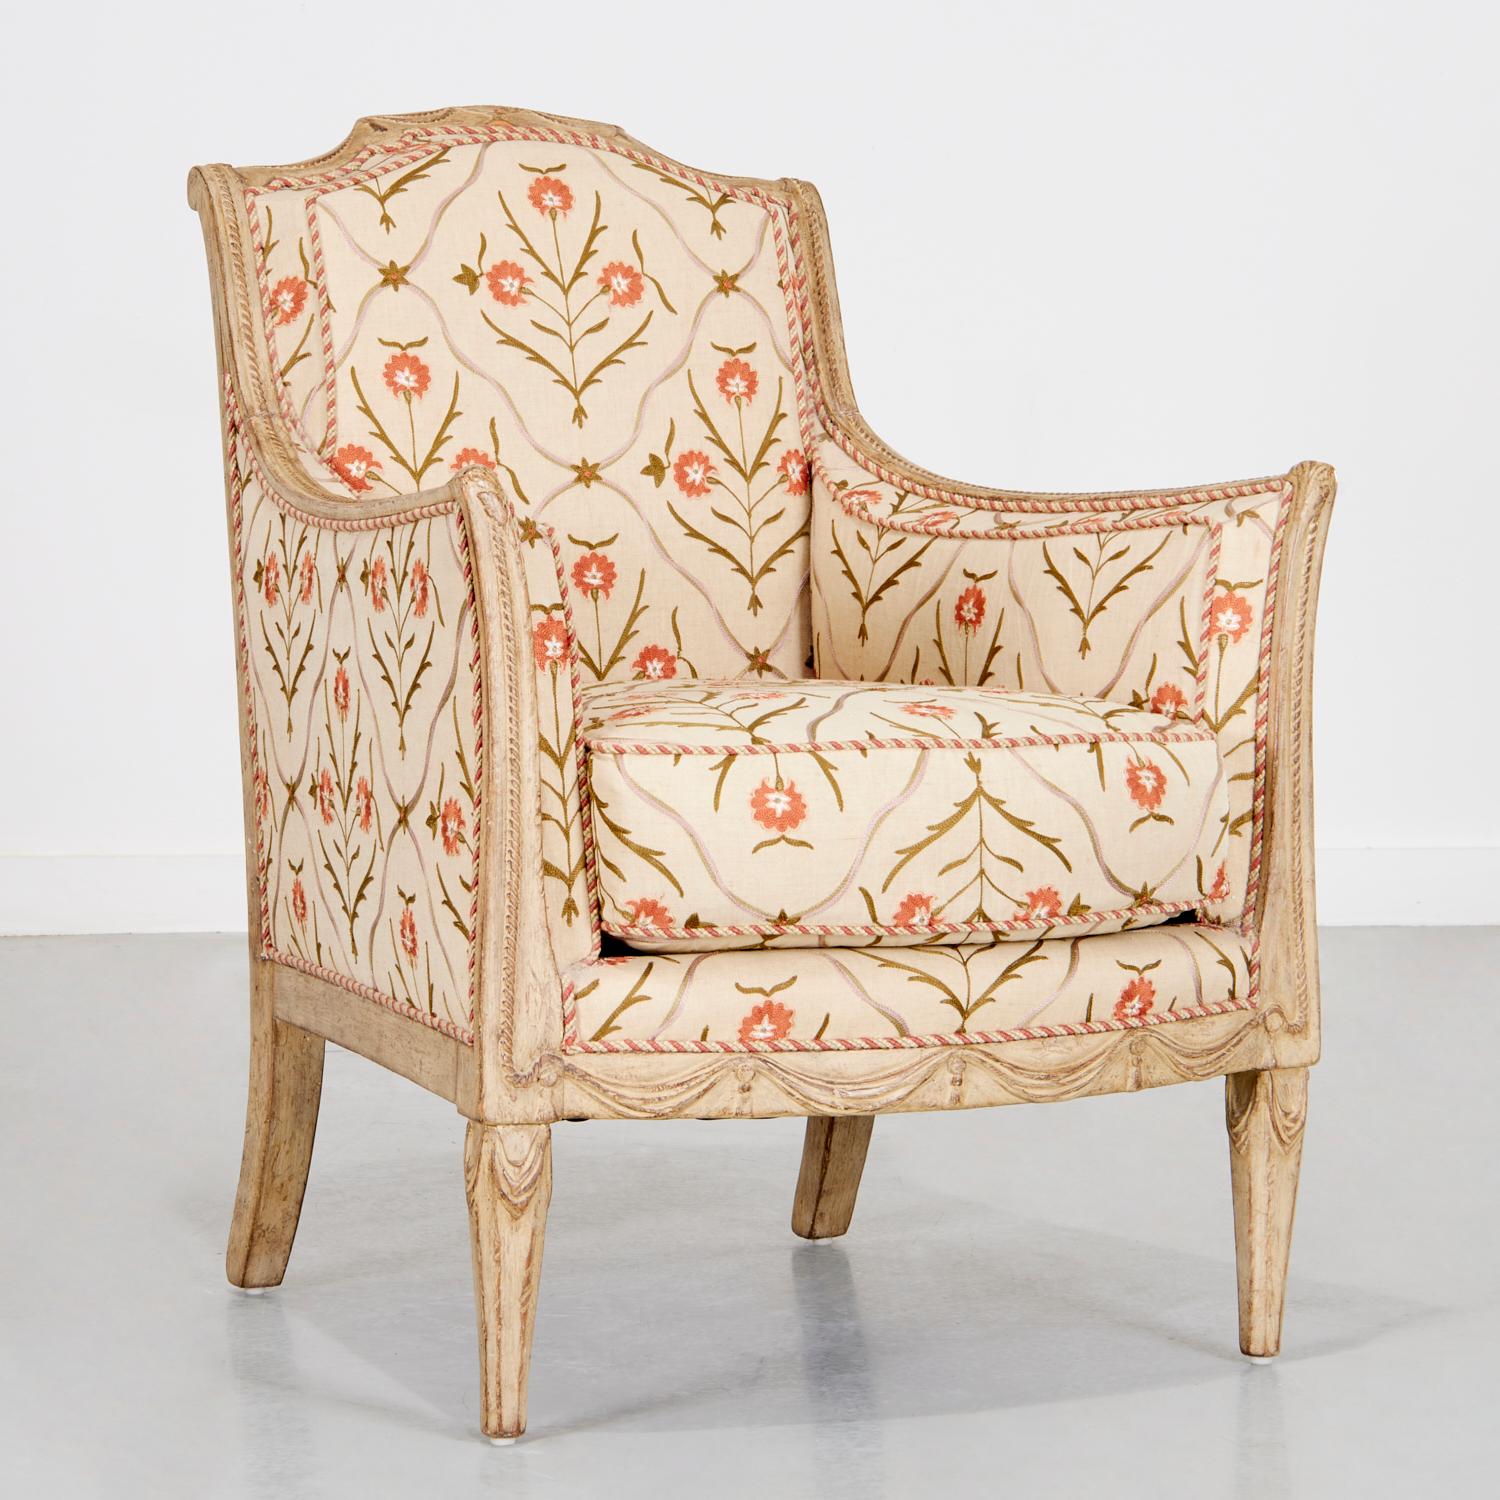 20th C. Directoire Style Painted and Floral Crewelwork Upholstered Bregere For Sale 2